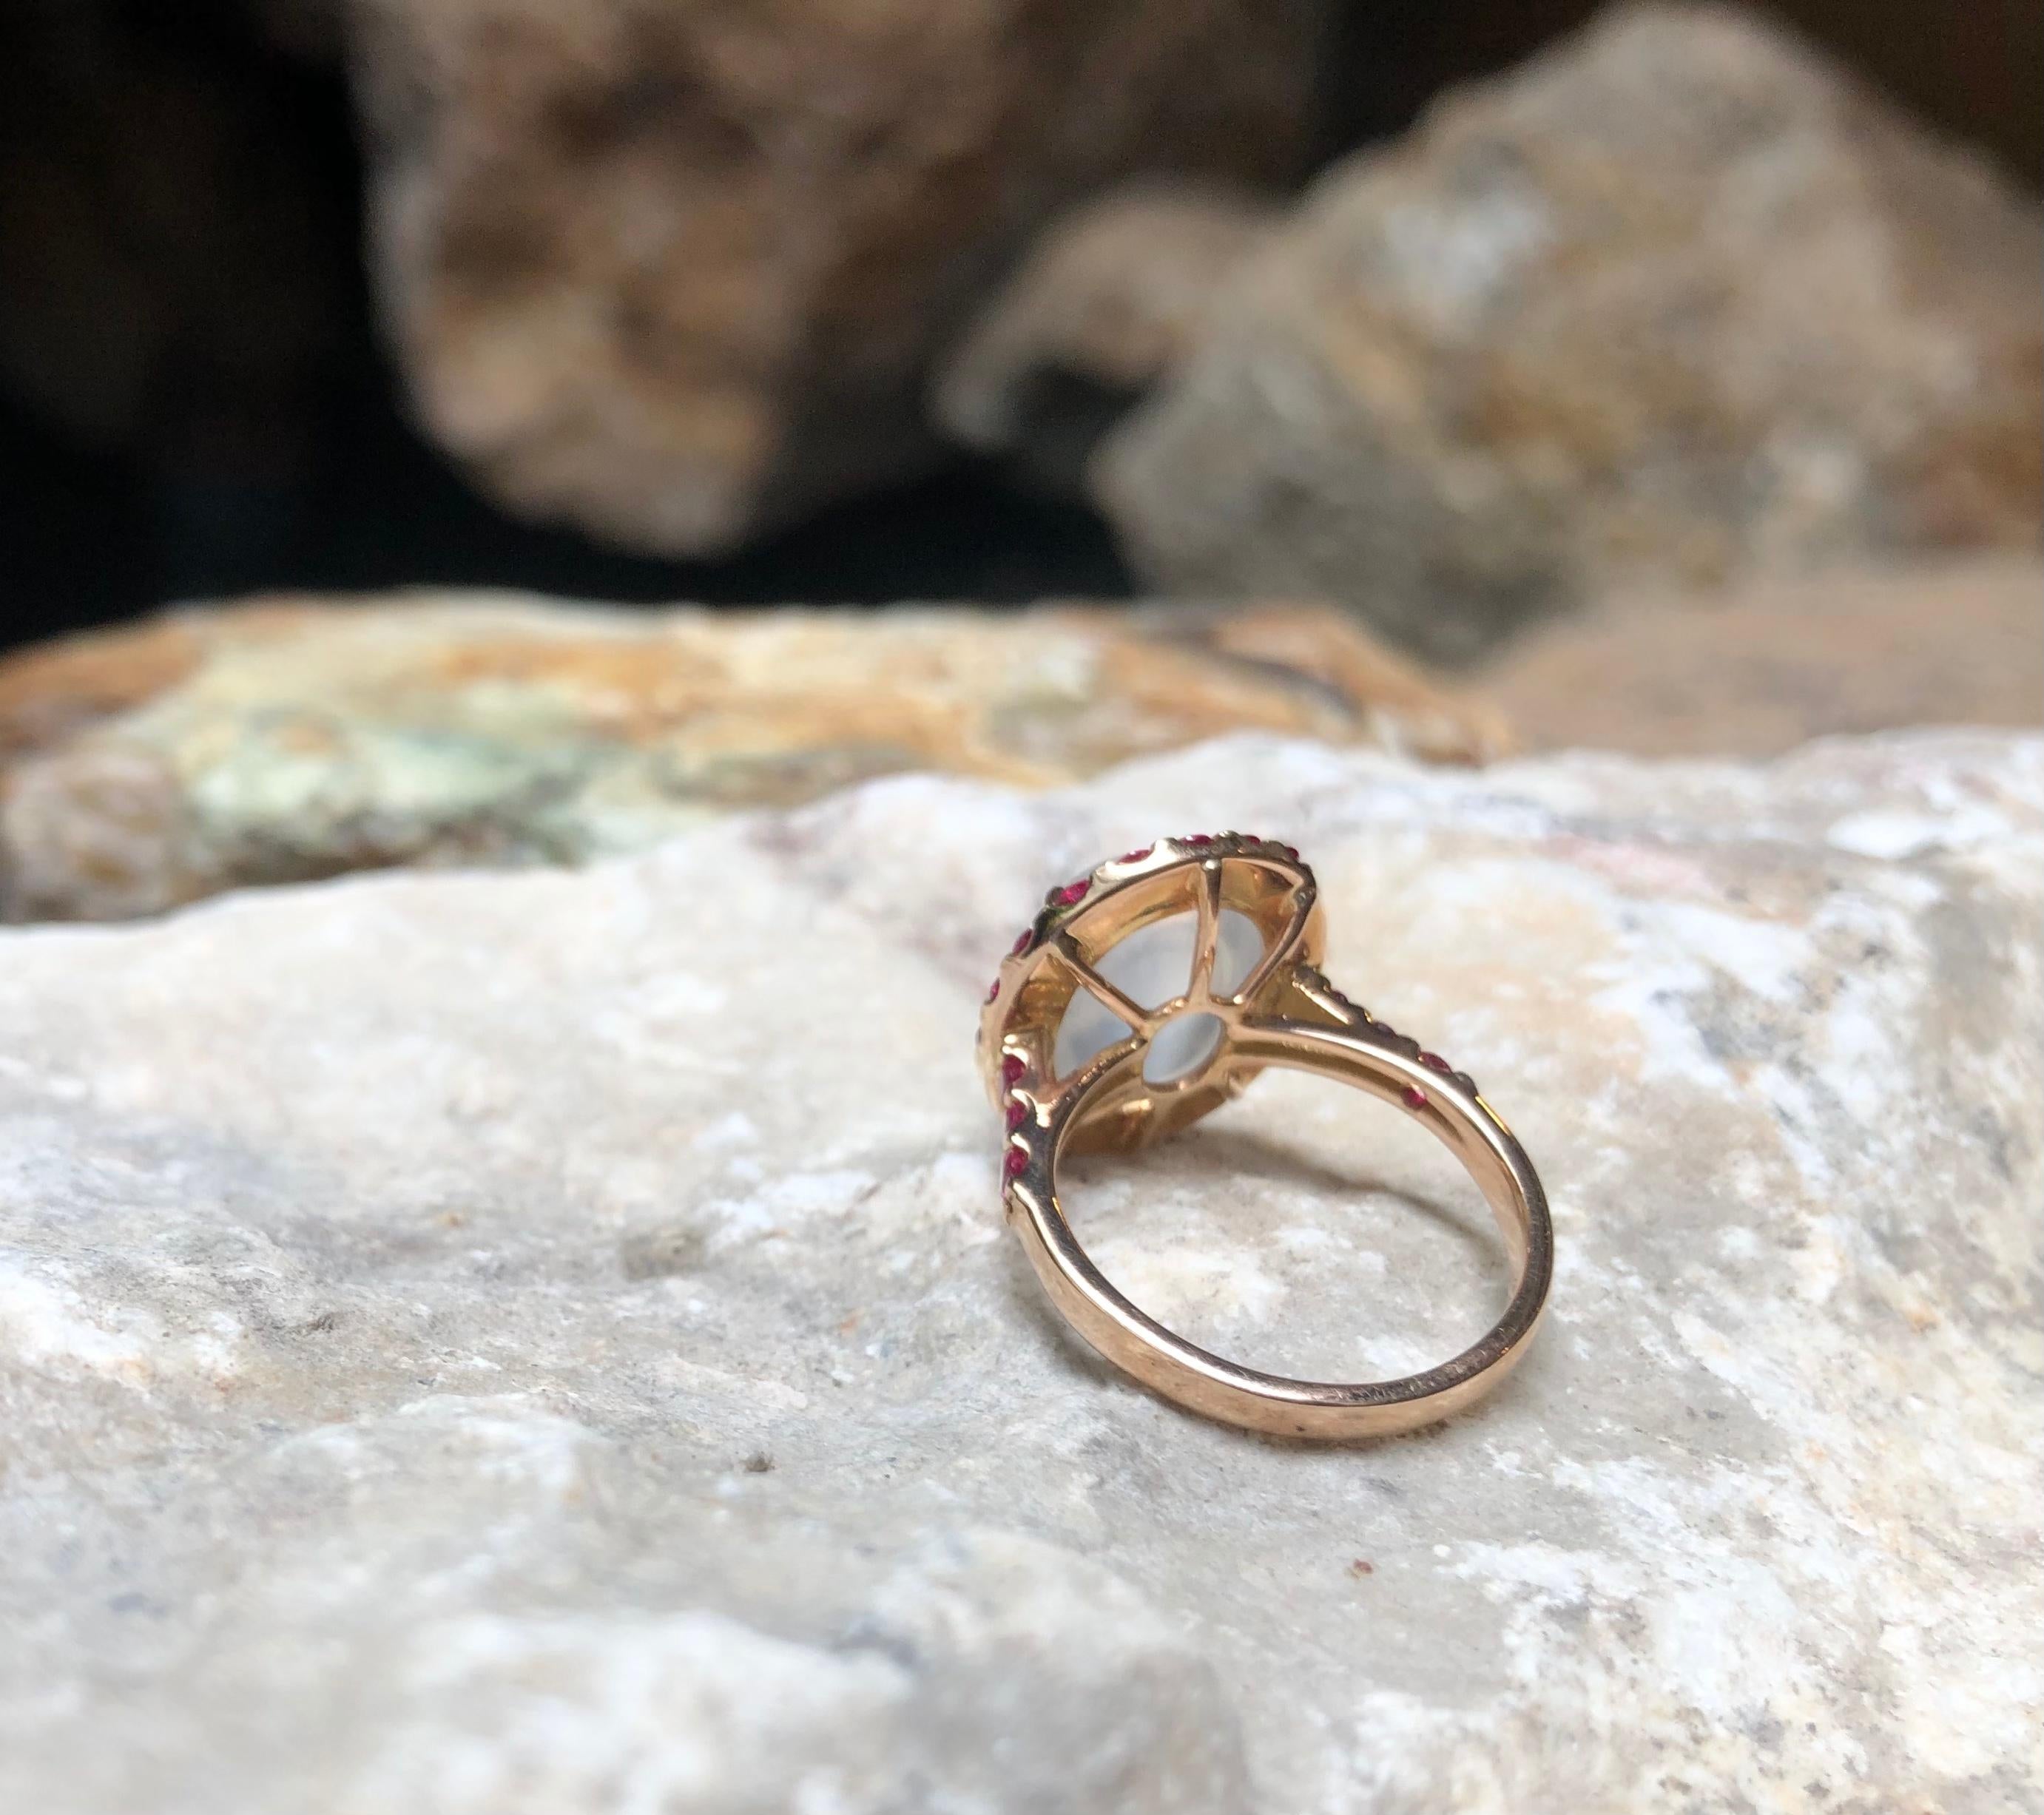 Cabochon Moonstone with Ruby Ring set in 18 Karat Rose Gold Settings